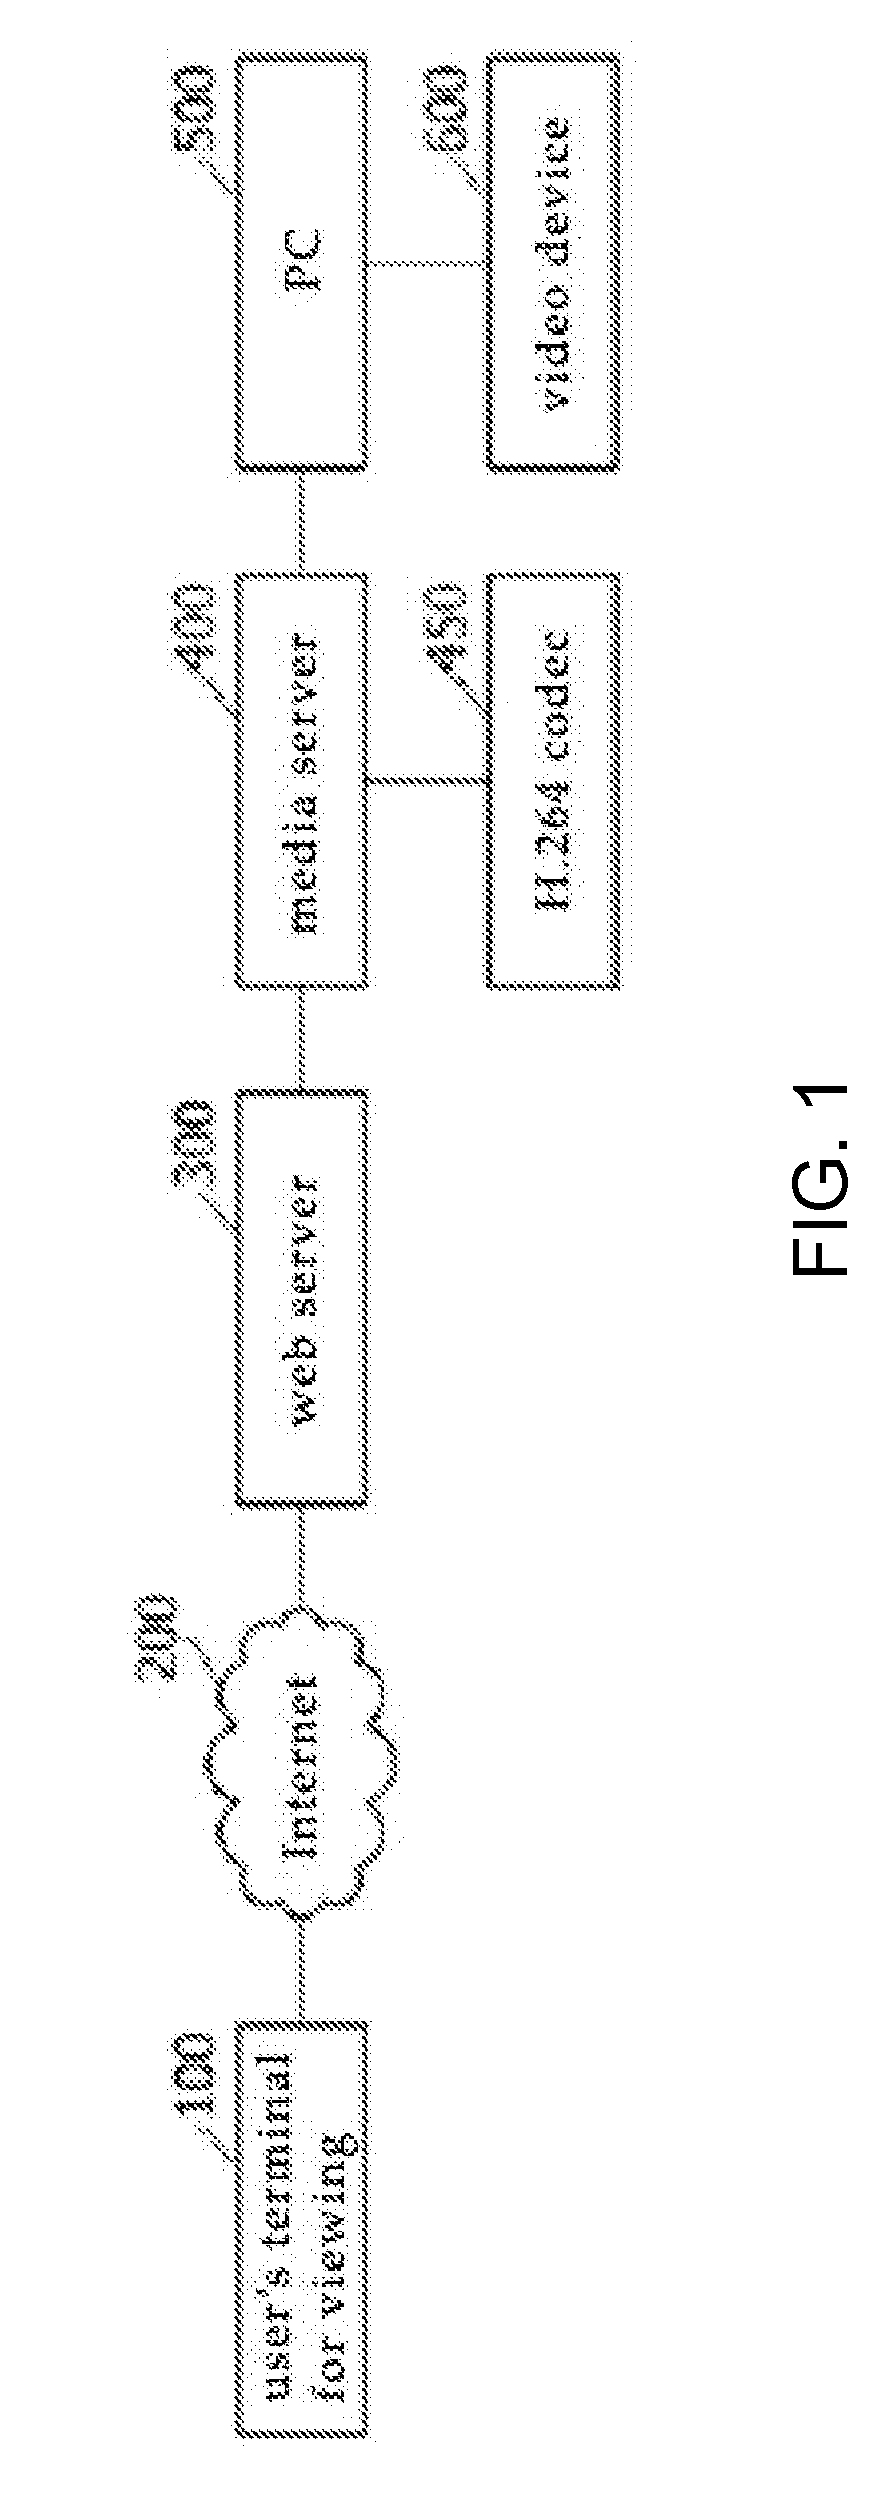 System for personal video broadcasting and service method using internet